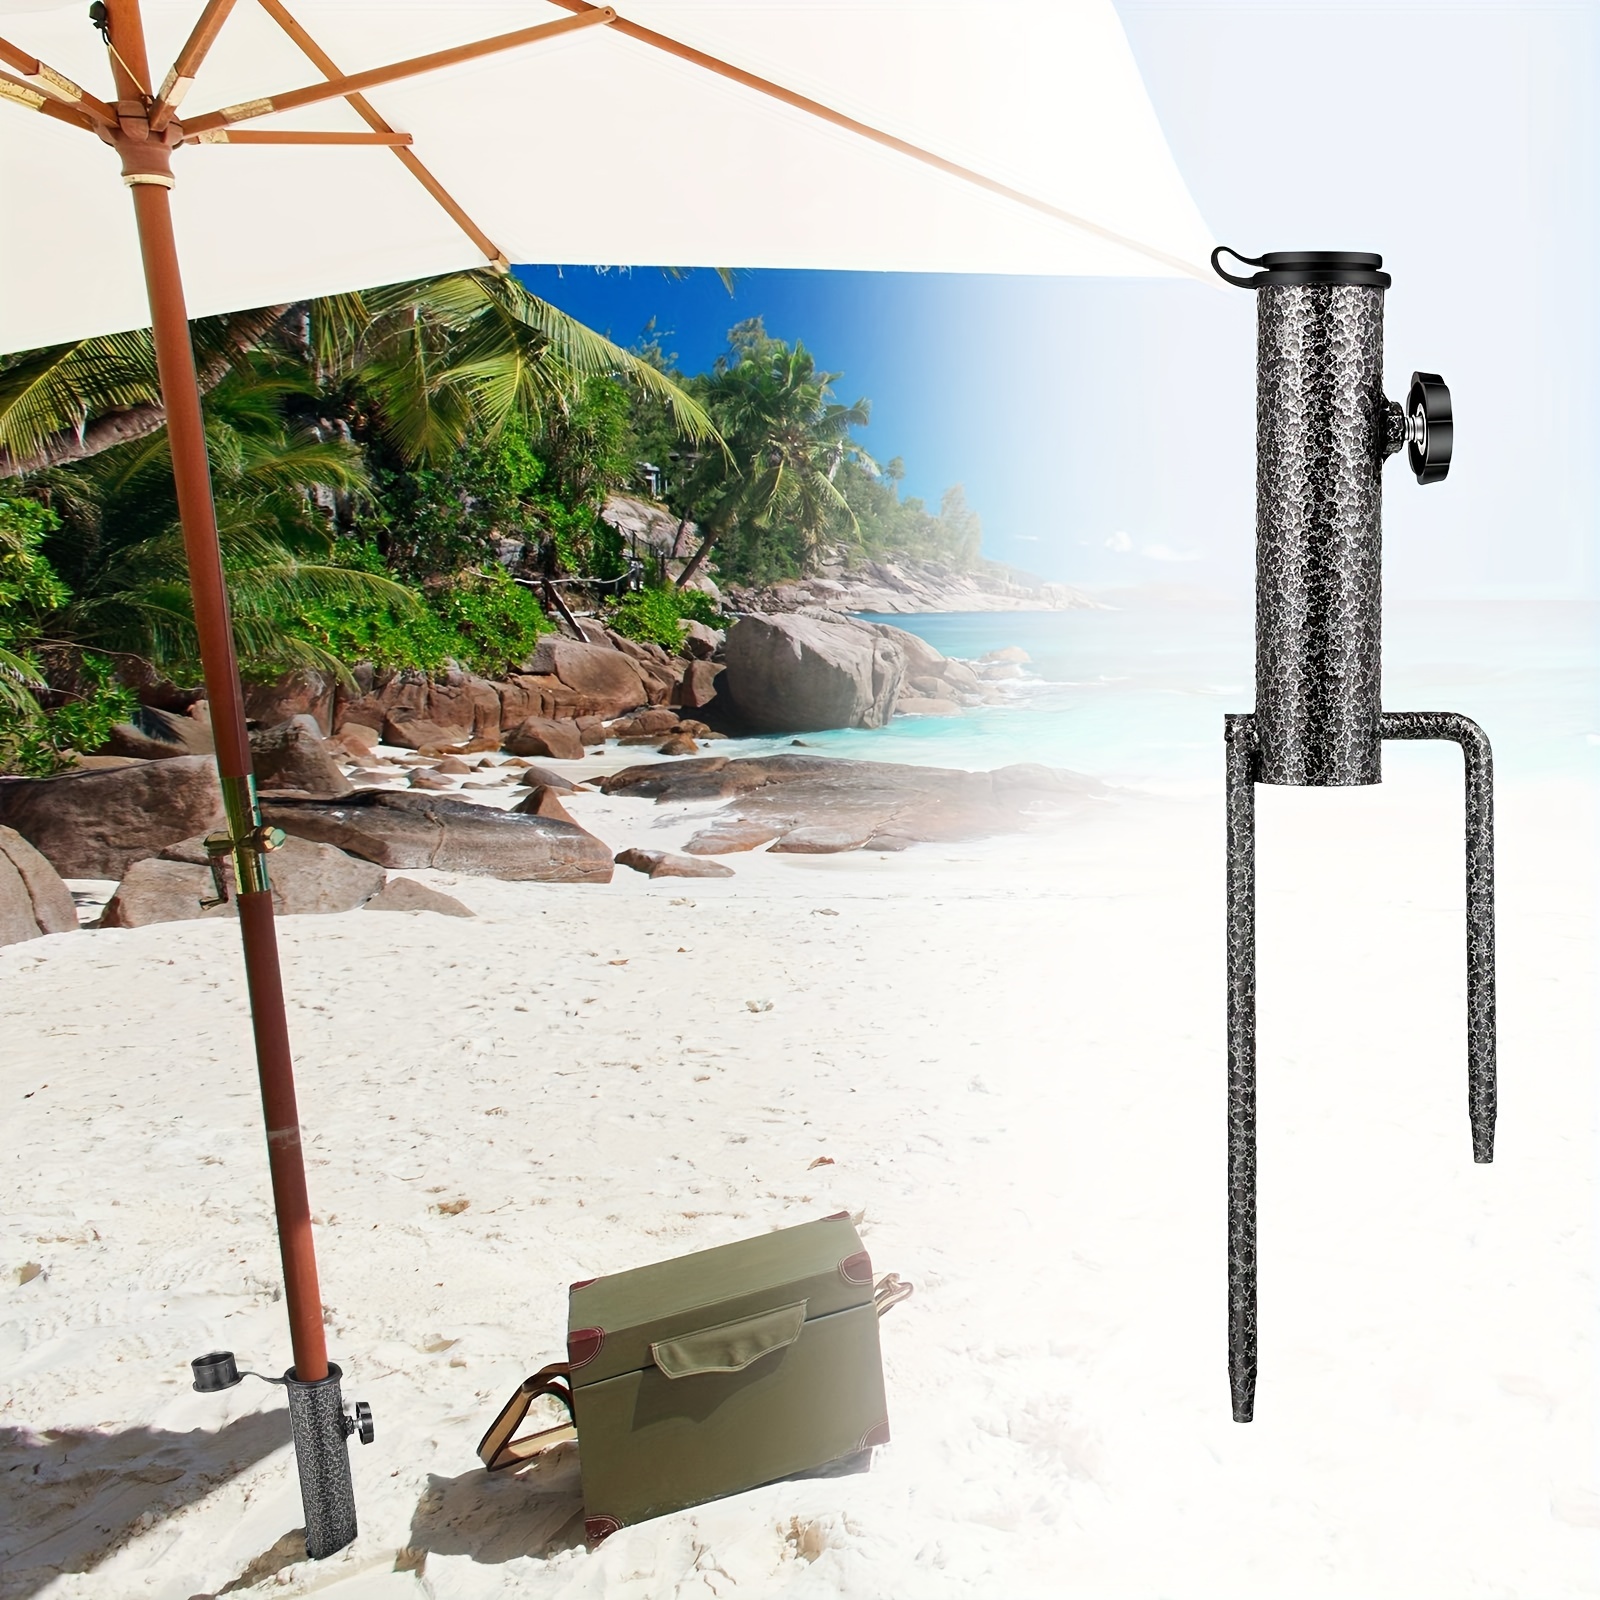 

patio Perfect" Heavy-duty Adjustable Umbrella Stand - 14" Portable Ground Insert, Coated Steel For Outdoor, Patio, Beach Use - Fits 28-32mm Poles